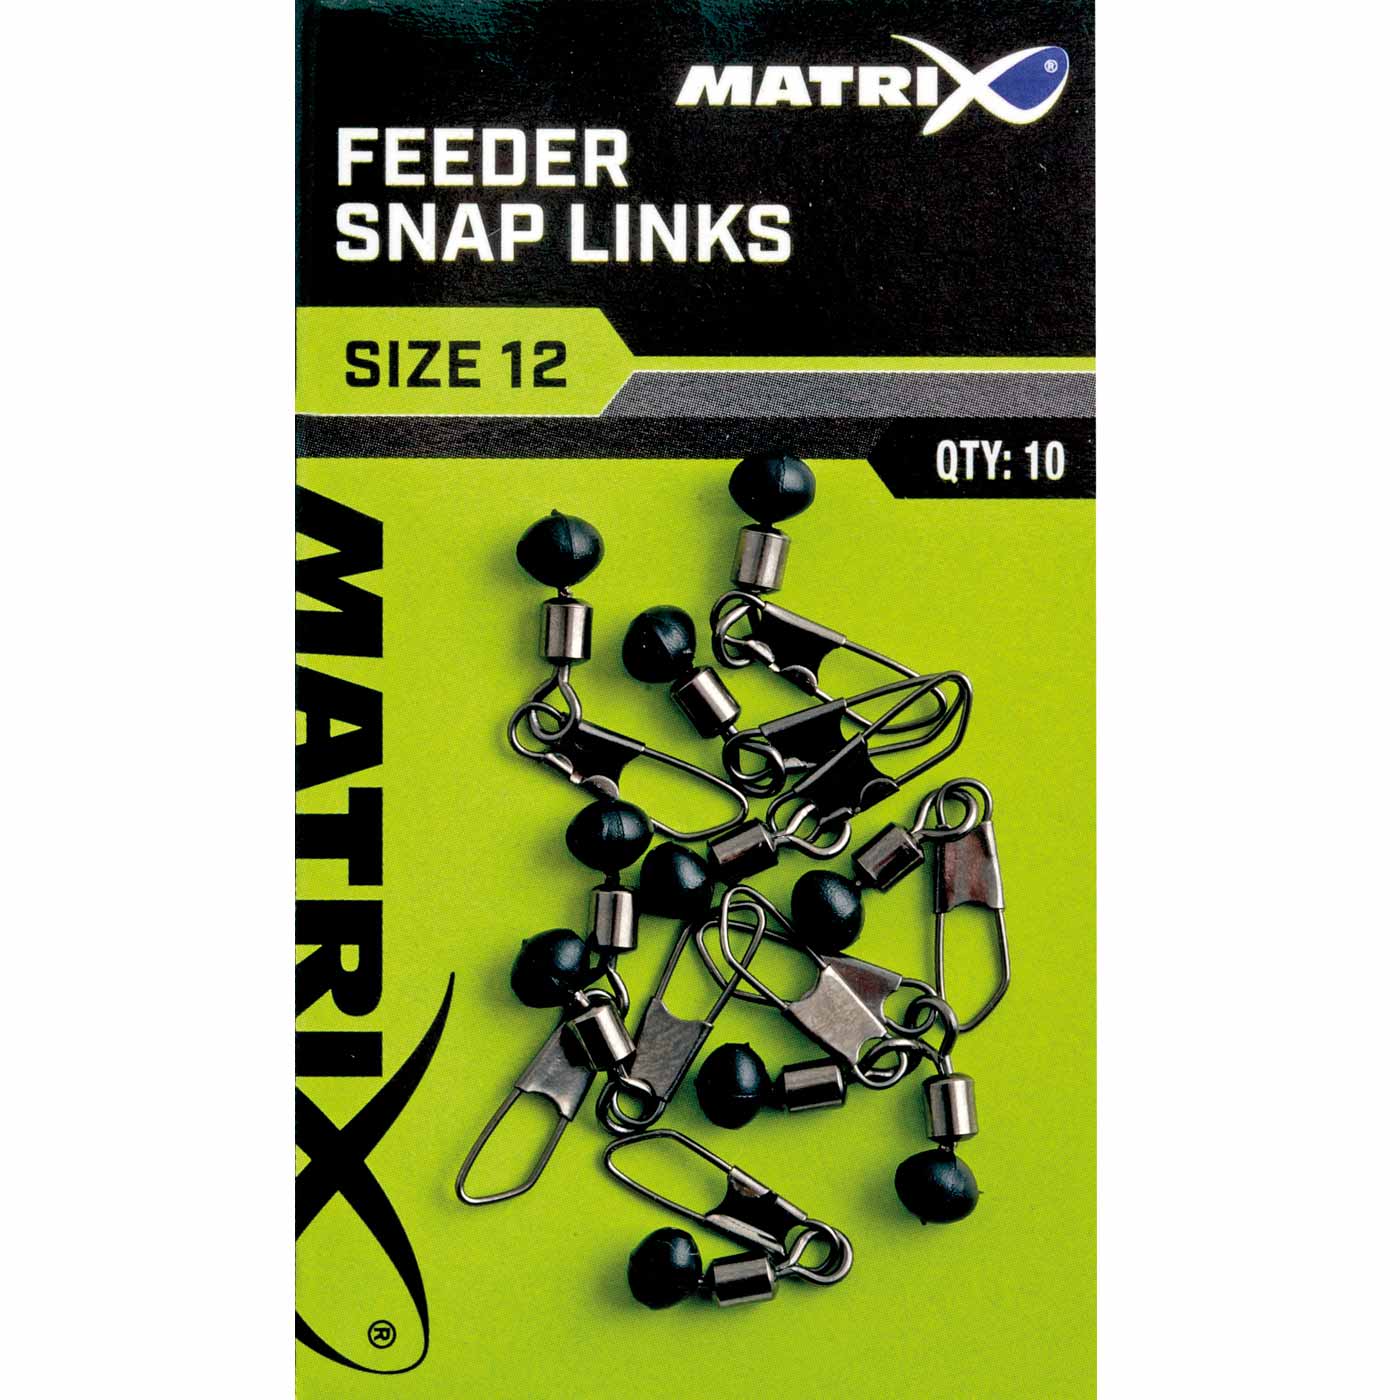 Feeder Snap Links Size 12